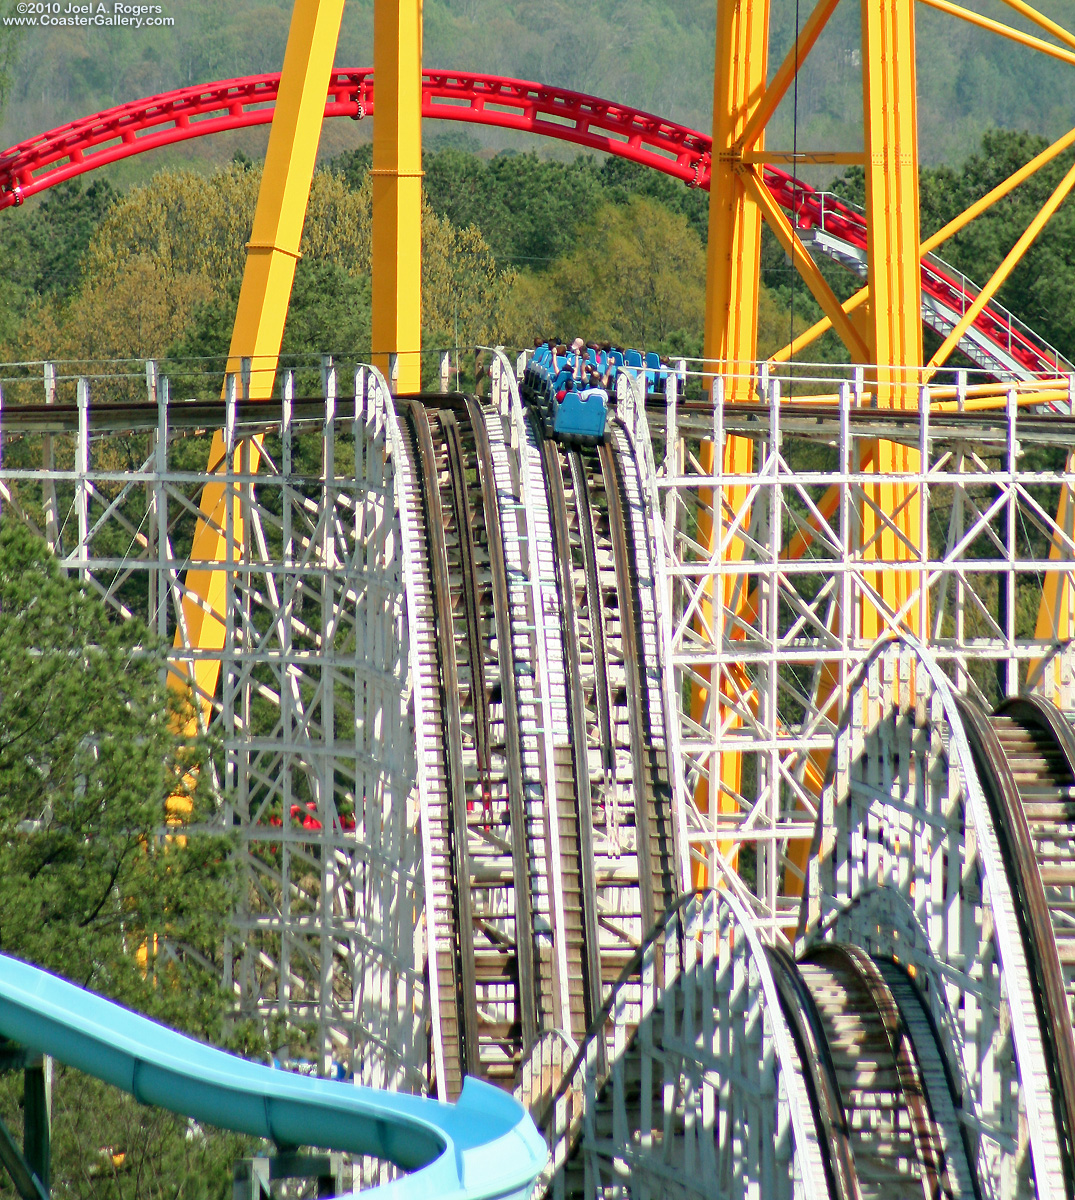 Rebel Yell and Intimidator 305 roller coasters. The wooded coaster was designed by John Allen and built by PTC.